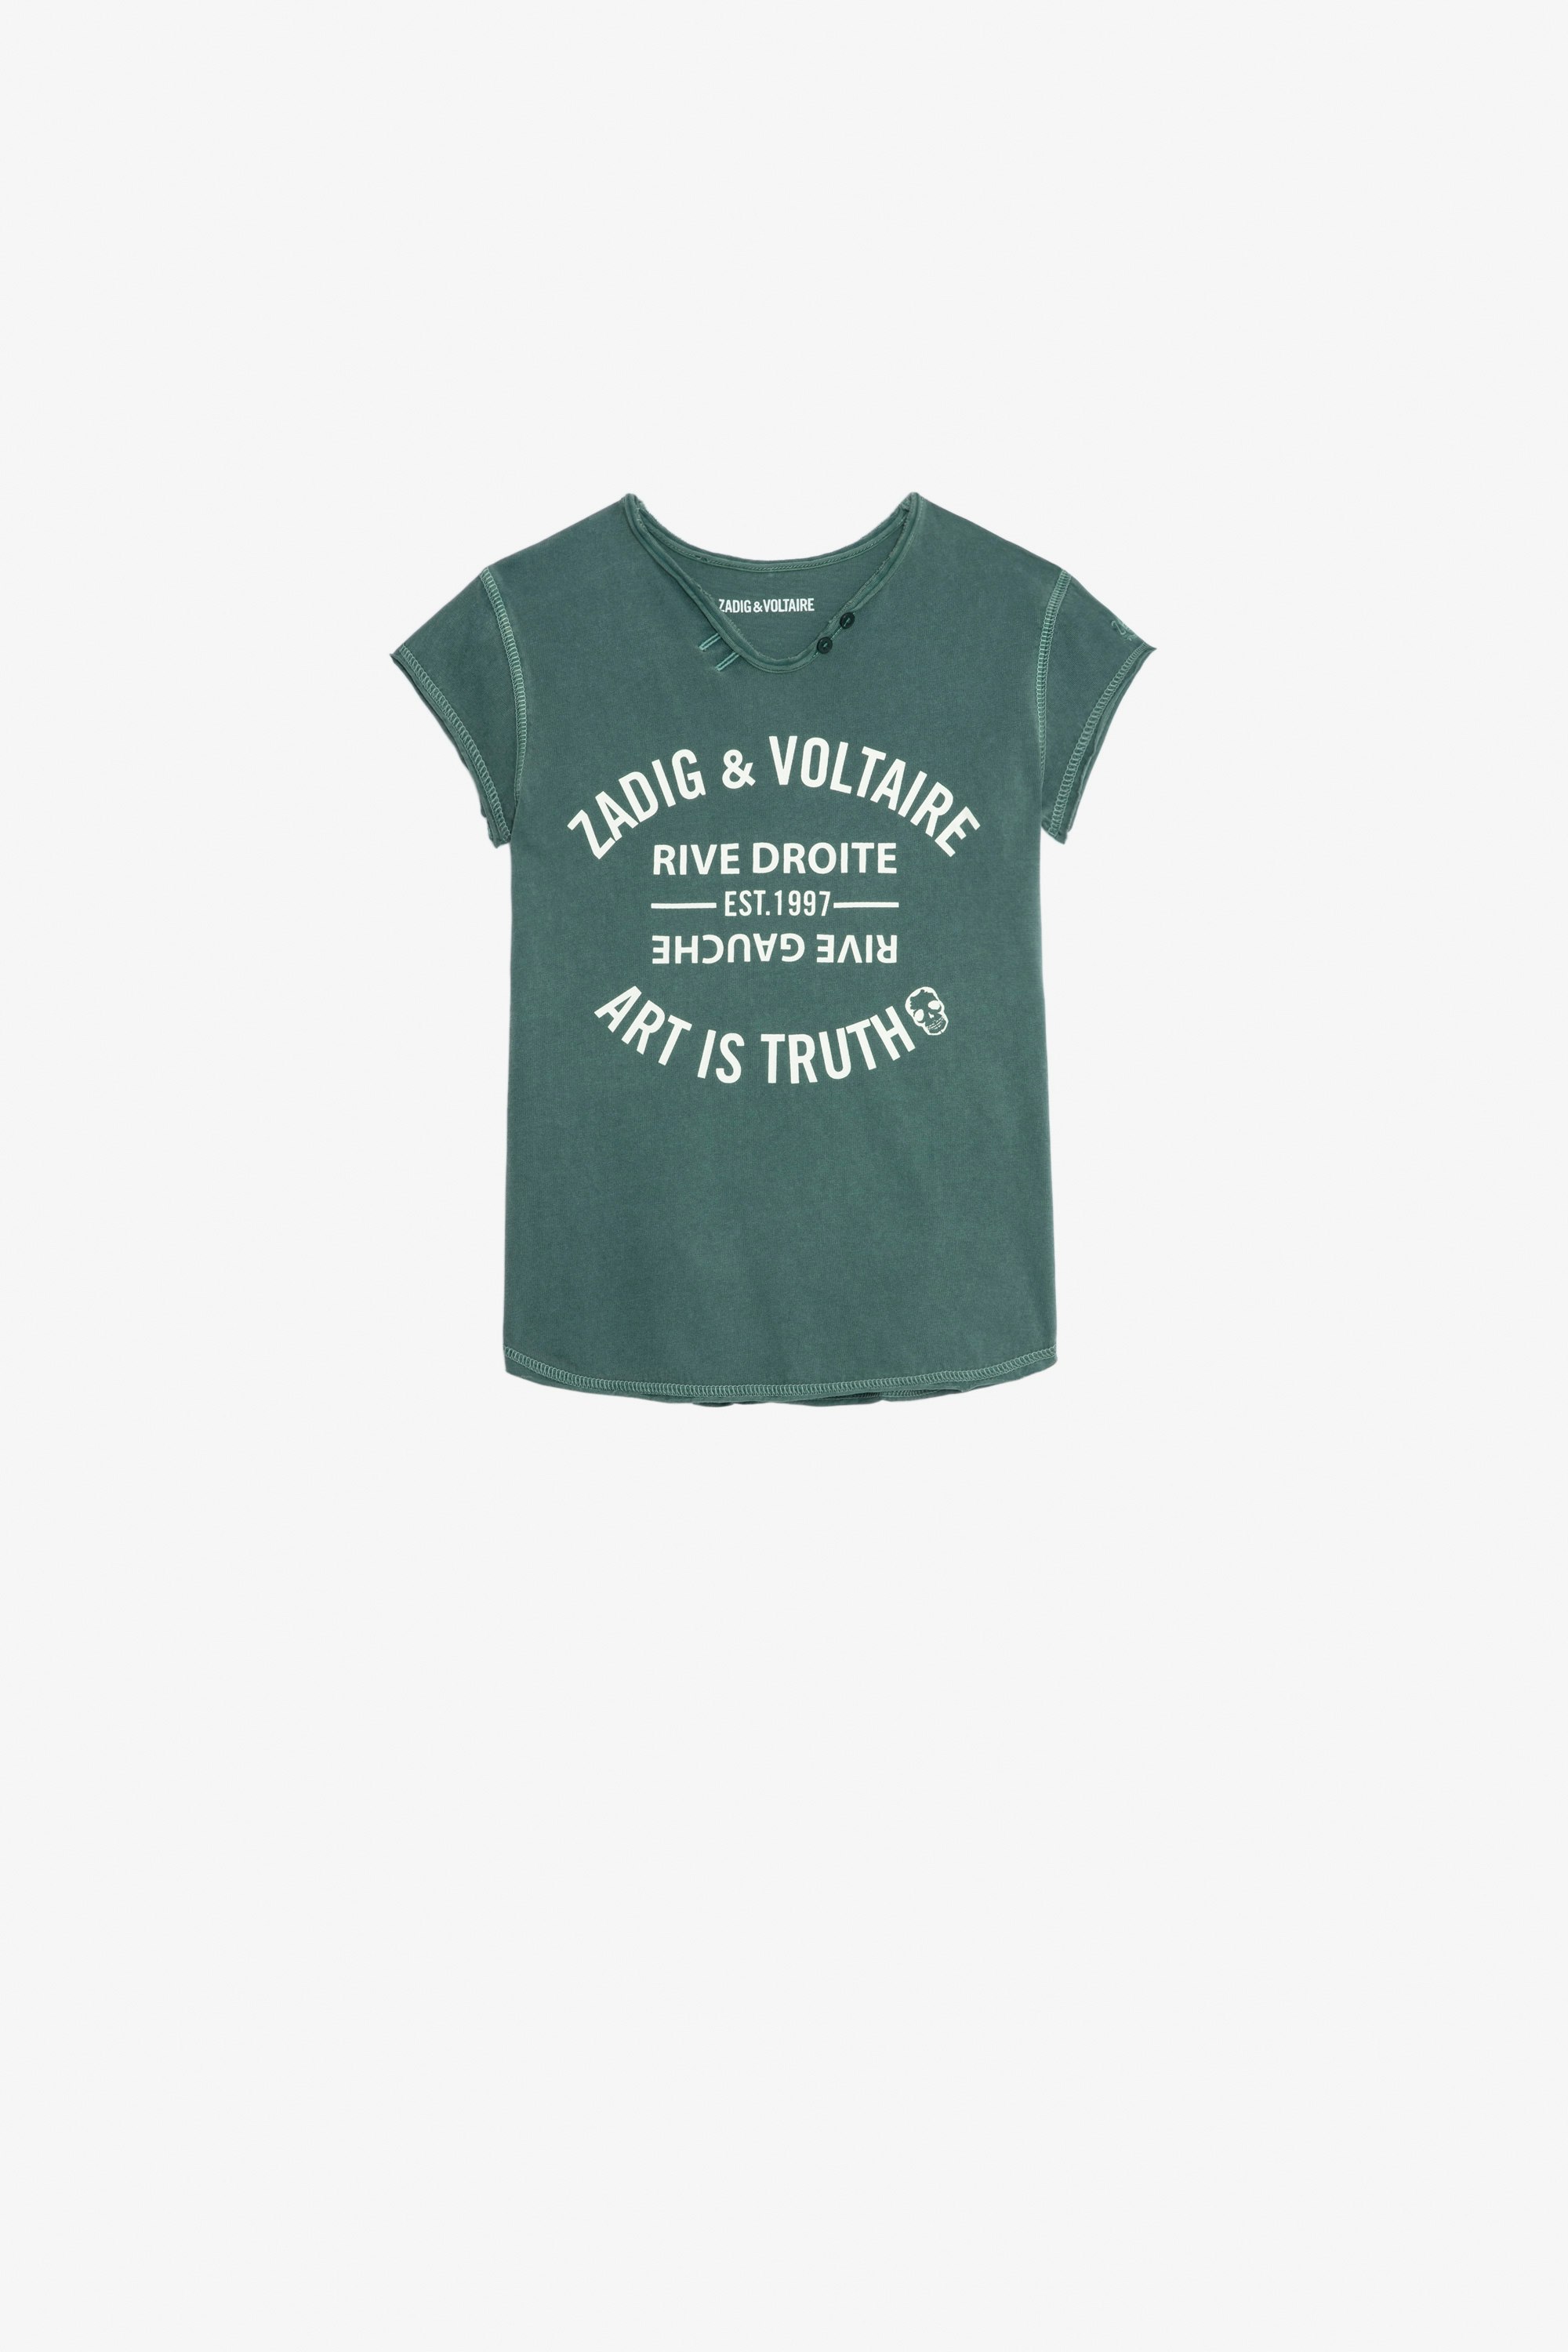 Boxo Girls’ T-Shirt - Girls’ dark green short-sleeved cotton jersey T-shirt with insignia print and embroidery.